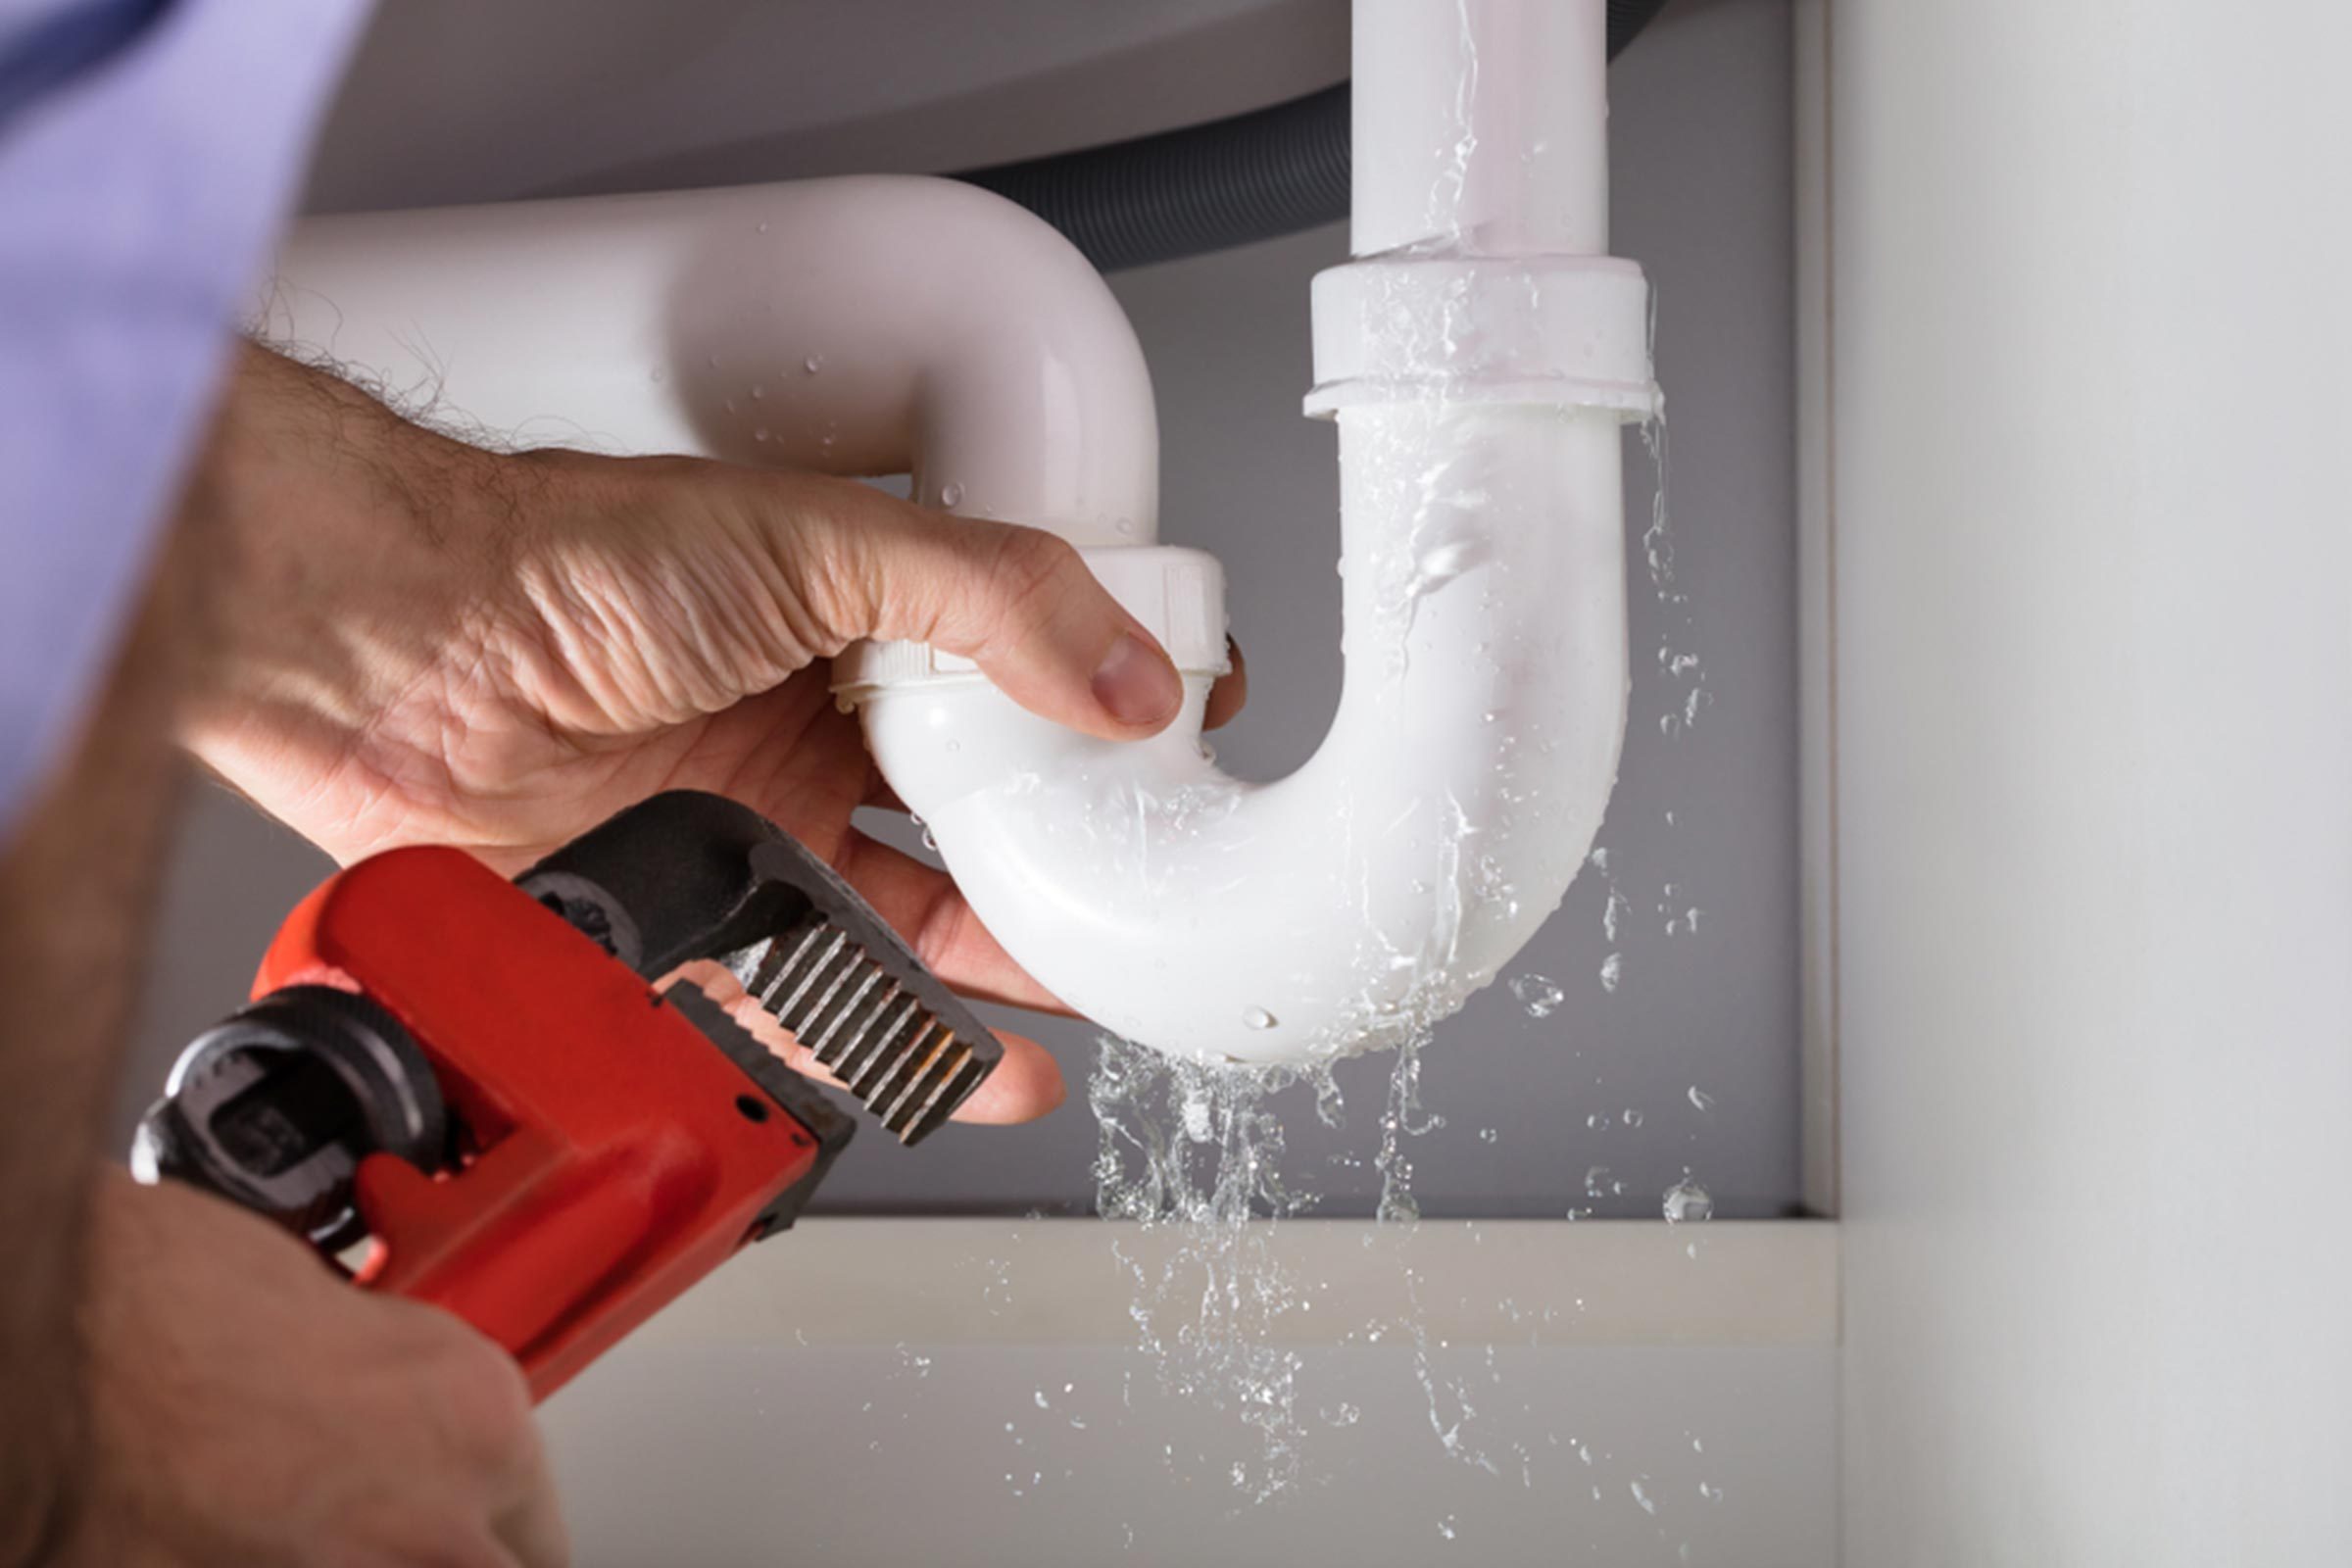 Common Plumbing Emergencies and Ways to Deal With Them